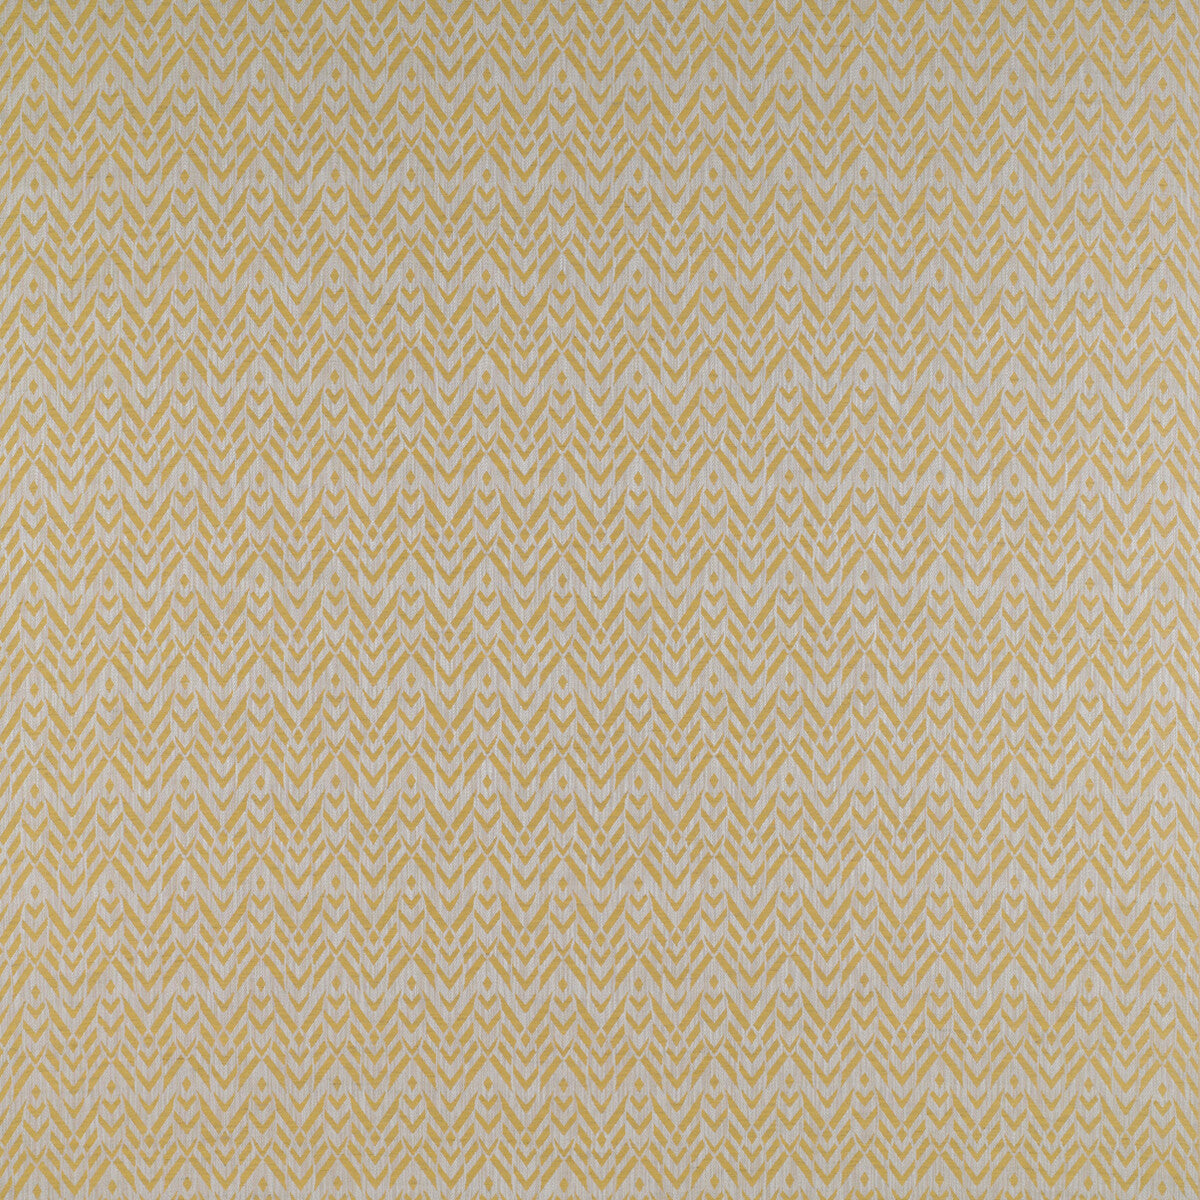 Cervantes fabric in amarillo color - pattern GDT5200.007.0 - by Gaston y Daniela in the Madrid collection